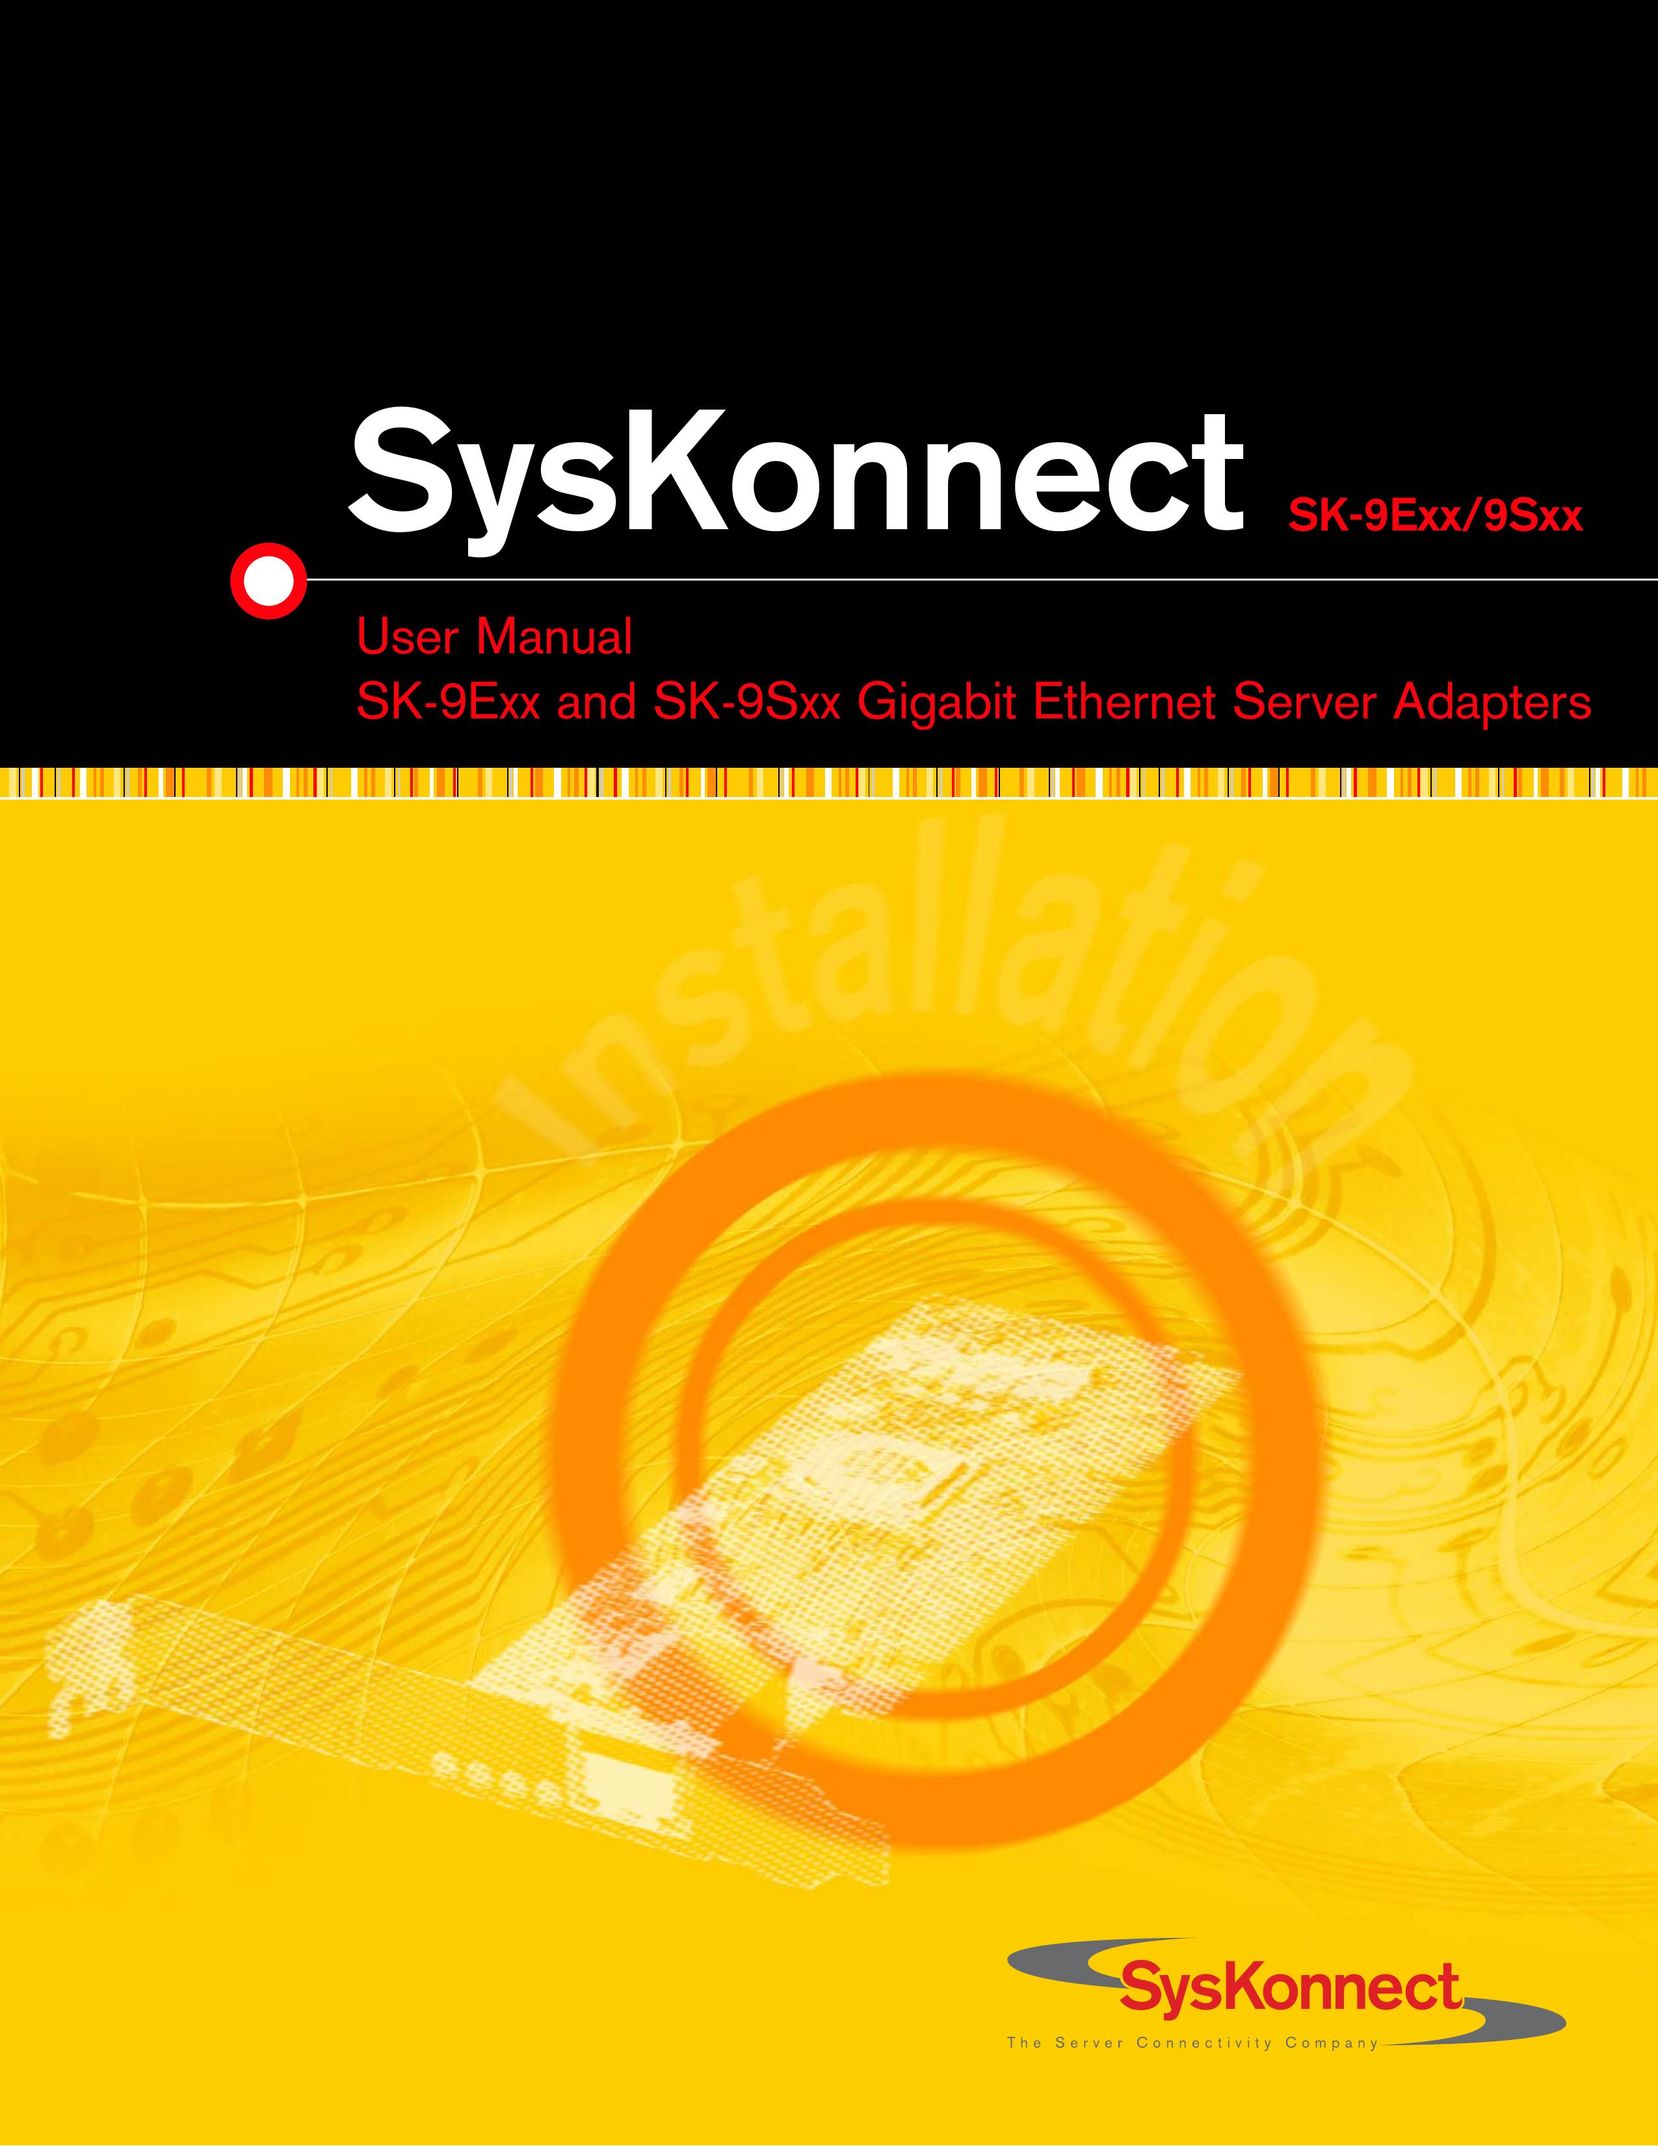 SysKonnect SK-9Sxx Network Card User Manual